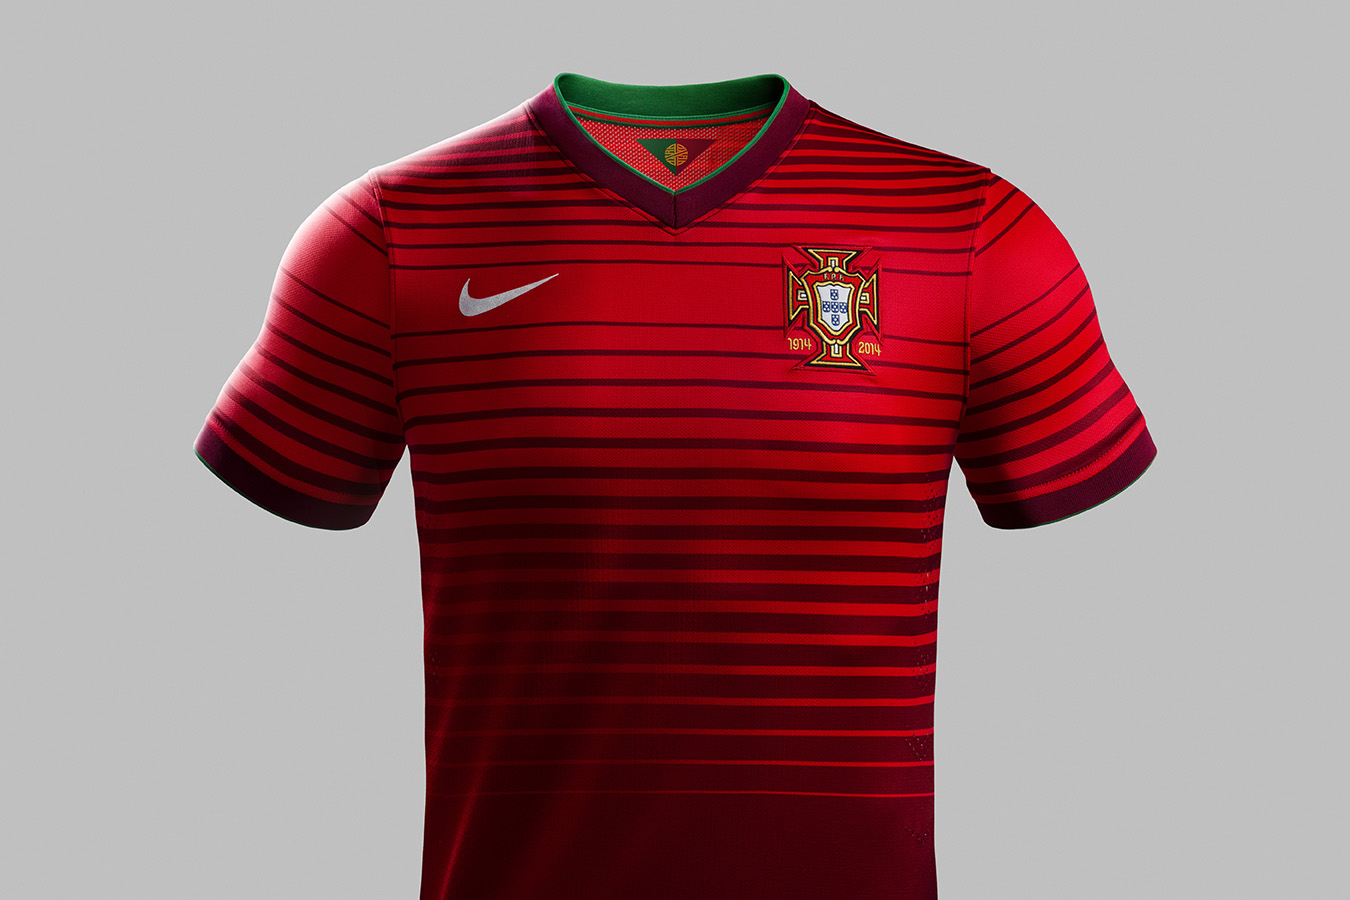 Portugal FIFA 2014 World Cup Jersey Wallpaper - Football HD Wallpapers